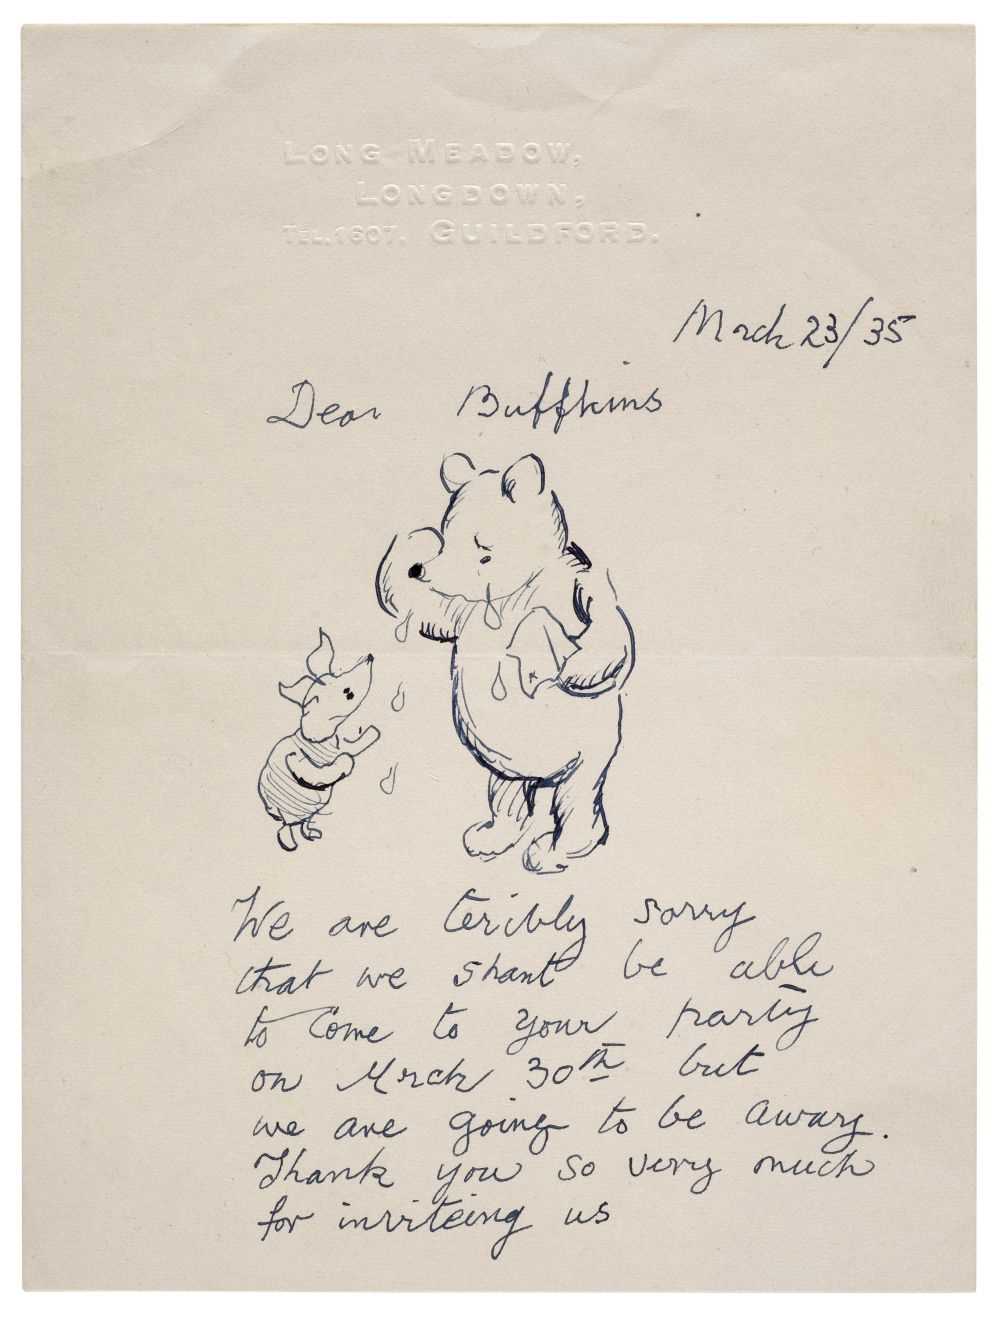 Lot 437 - Shepard (Ernest Howard). A Winnie-the-Pooh illustrated letter, 23 March 1935